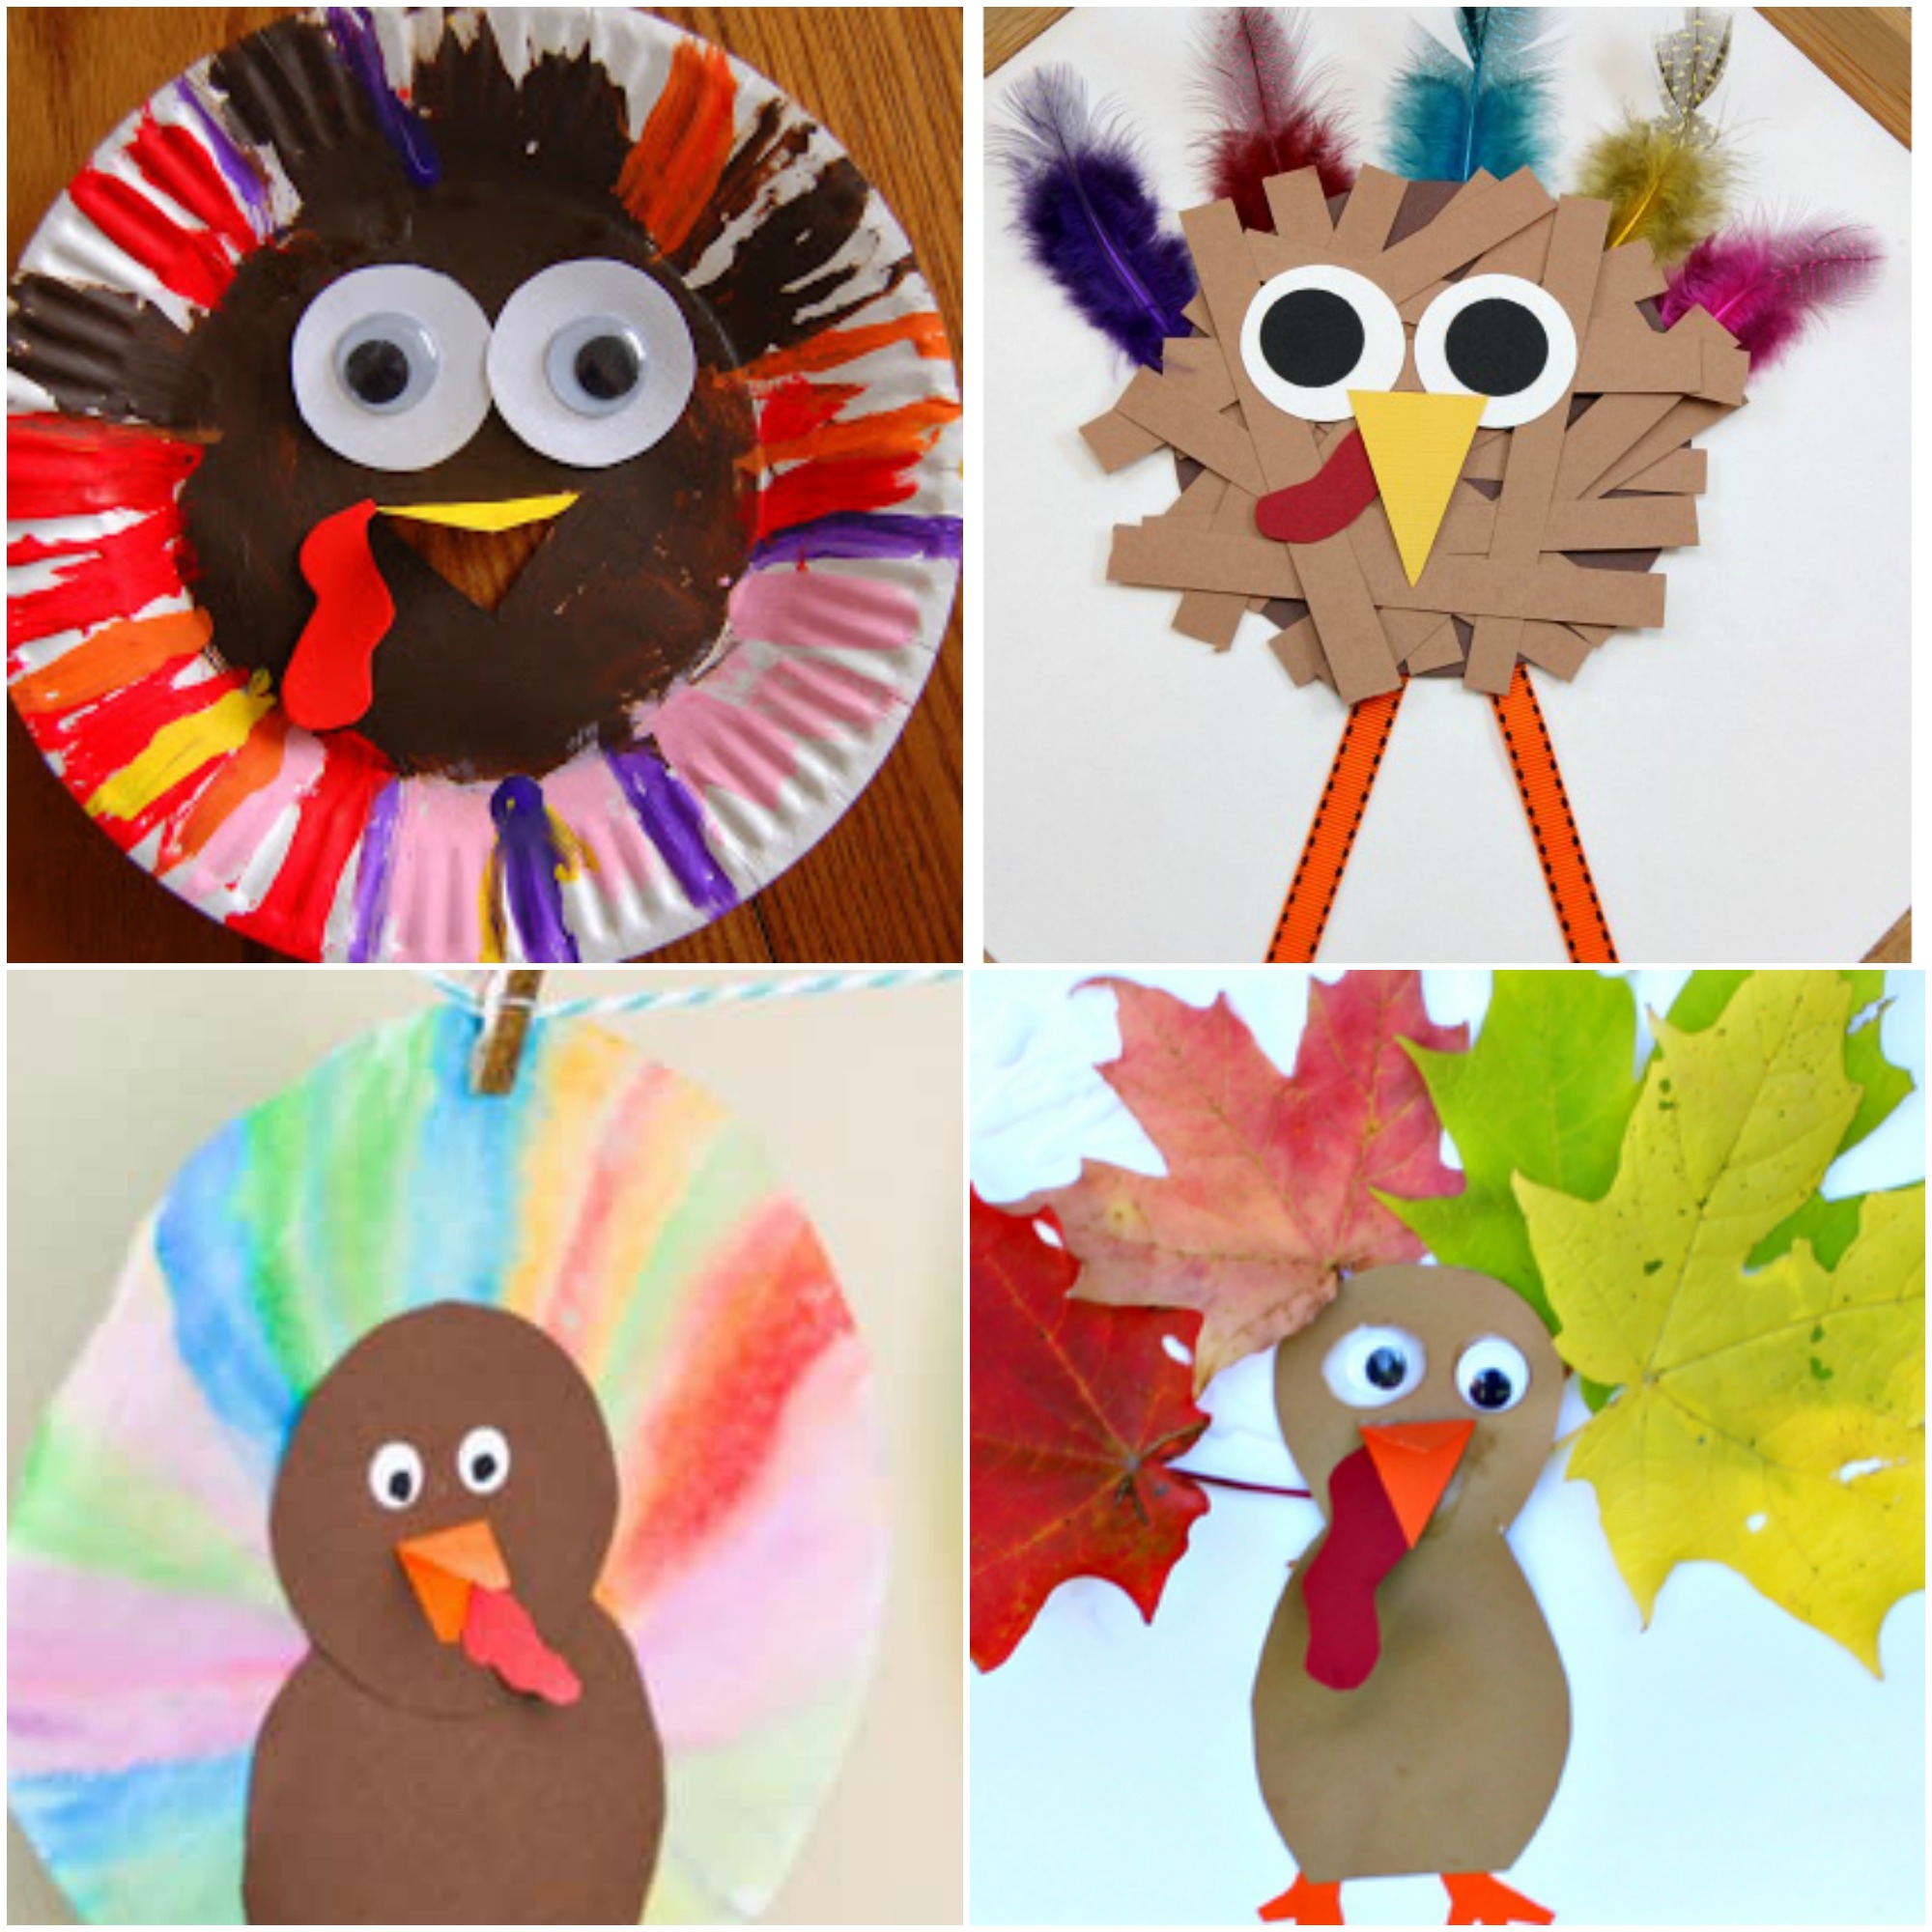 The holidays are a great time to have fun learning with your studnets! Add these Thanksgiving crafts for little learners to your fall learning units for great hands on fun!